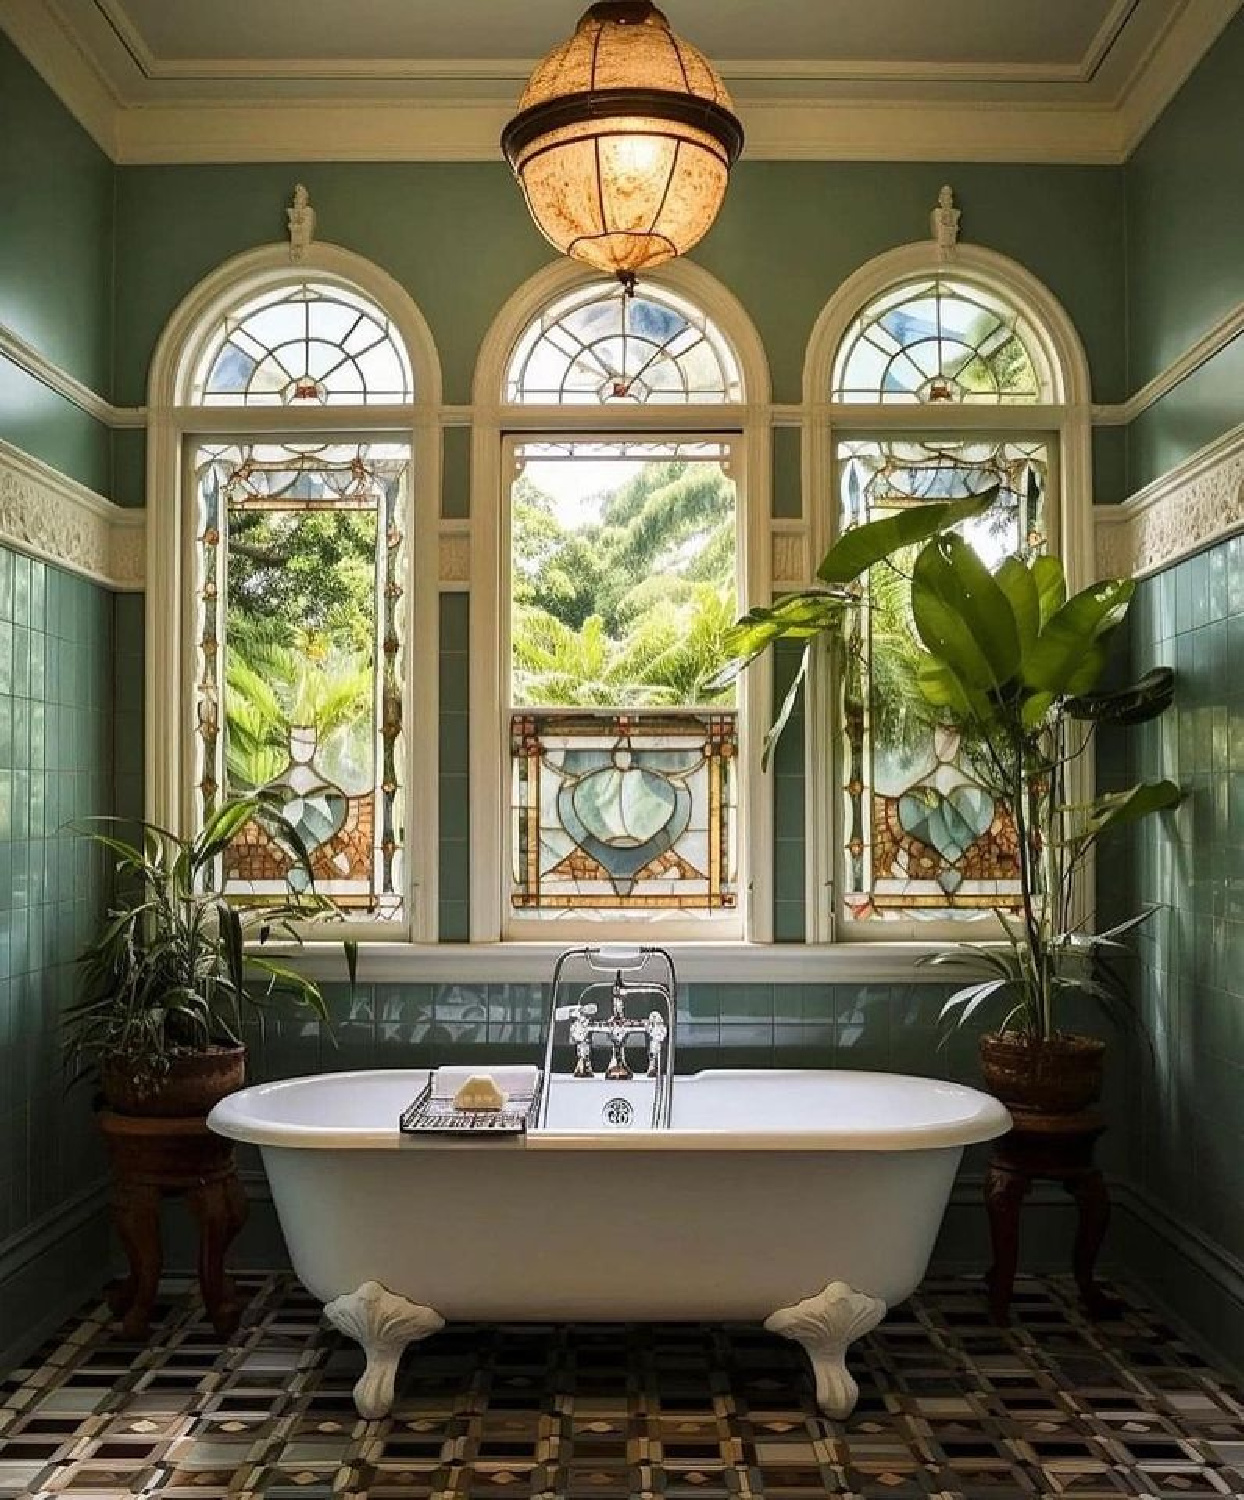 Victorian style bathroom with clawfoot tub and stained glass. AI Design via Whitney Hess (Just Decorate!). #aidesign #aiinteriordesign #aiarchitecture